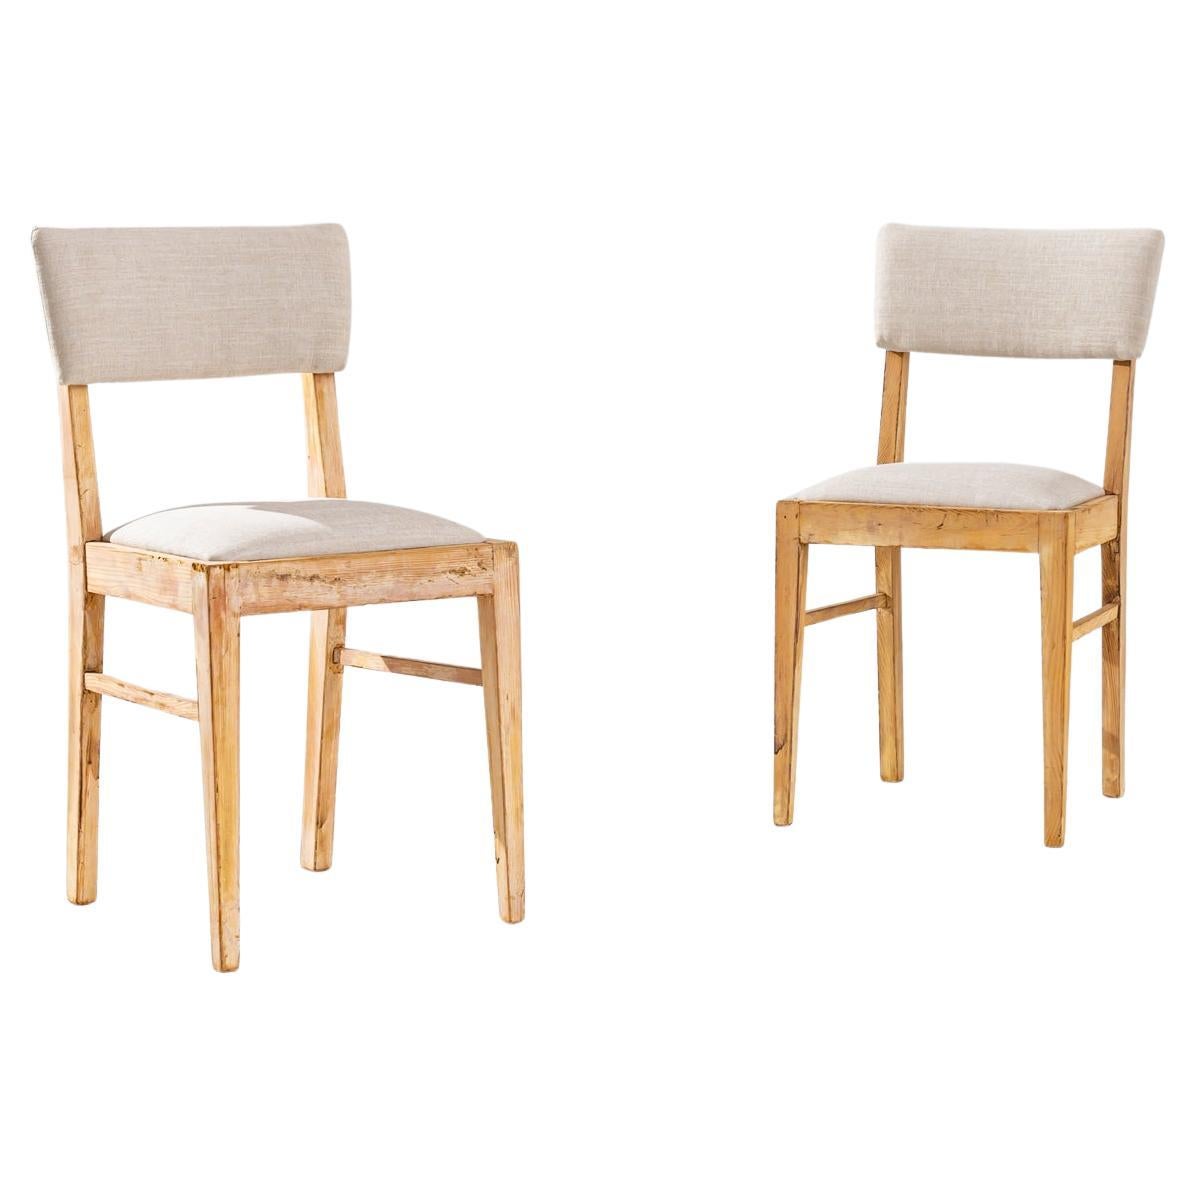 1900s Central European Wooden Chairs with Upholstered Seats and Back, a Pair For Sale